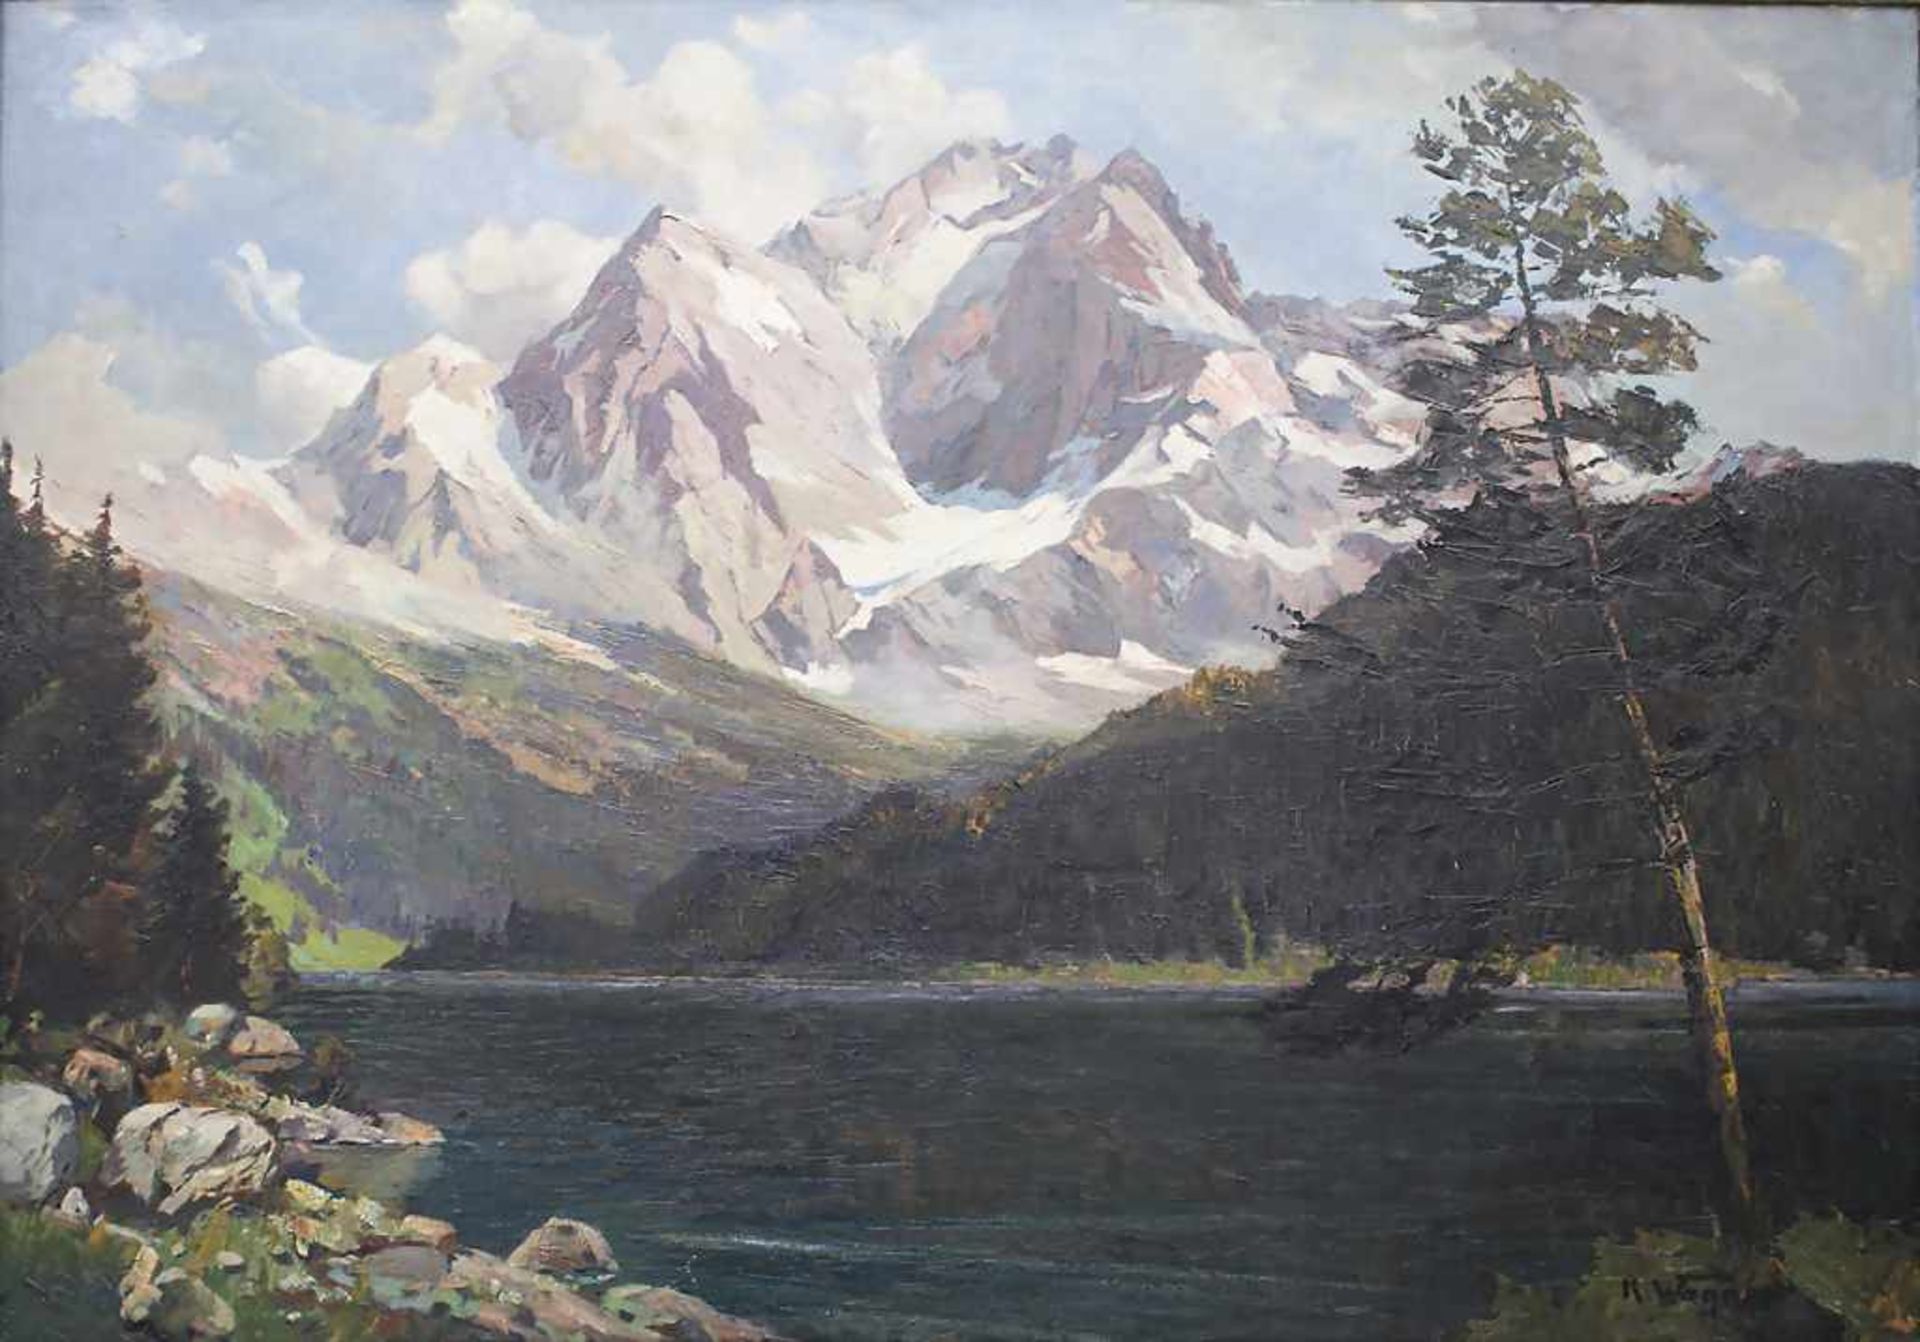 Karl Wagner (1796-1867), 'Bewaldete Alpenlandschaft mit Bergsee' / 'A forested mountain with lake'